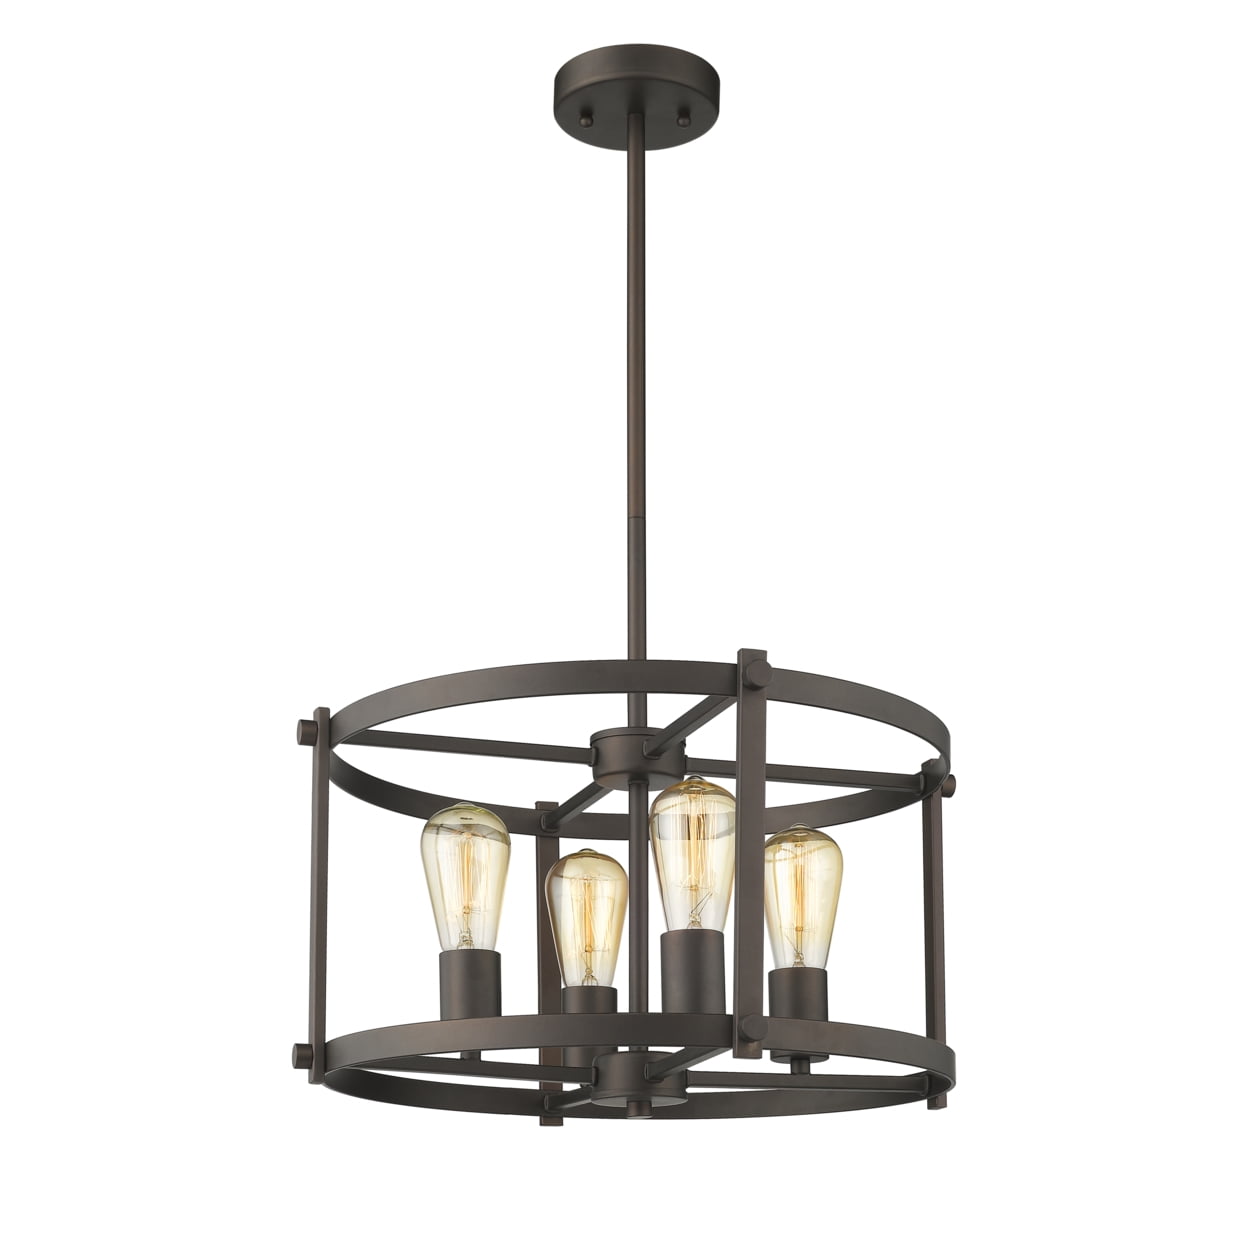 Picture of Chloe Lighting CH2H119RB18-UP4 Ironclad Farmhouse 4 Light Rubbed Bronze Convertible Ceiling Pendant - 17.5 in.